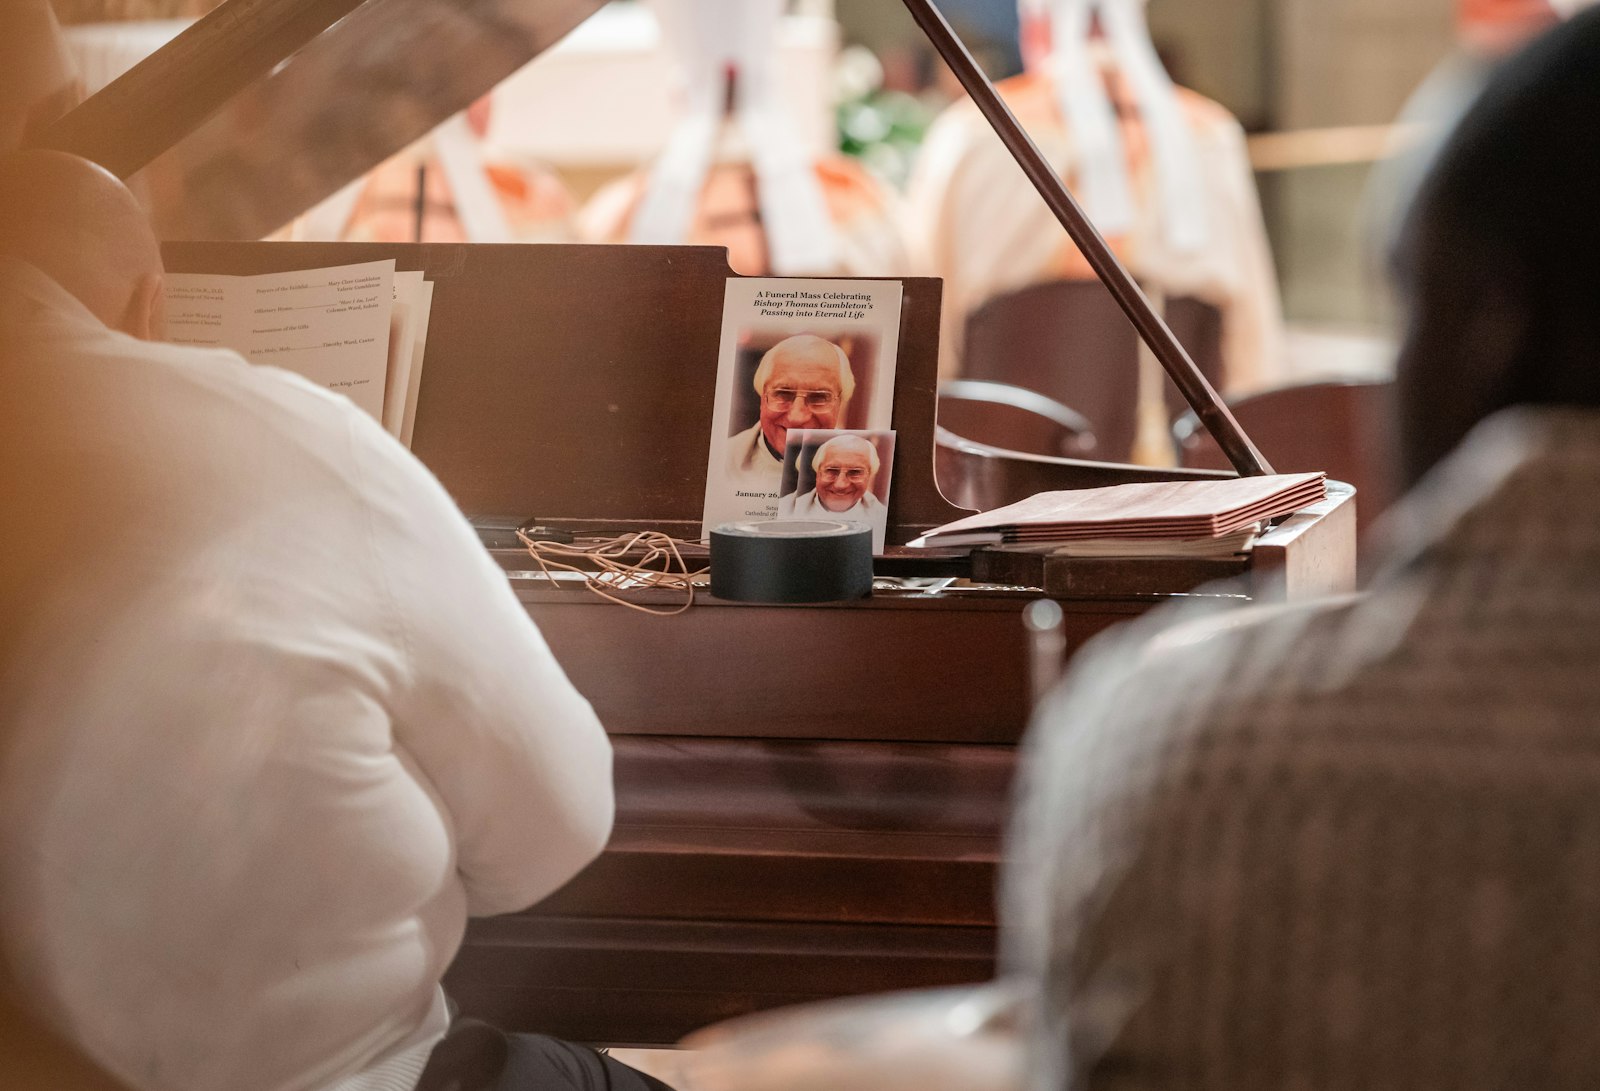 A prayer card and funeral program for Bishop Thomas J. Gumbleton are pictured on a piano in the sanctuary during Bishop Gumbleton's funeral Mass on April 13.